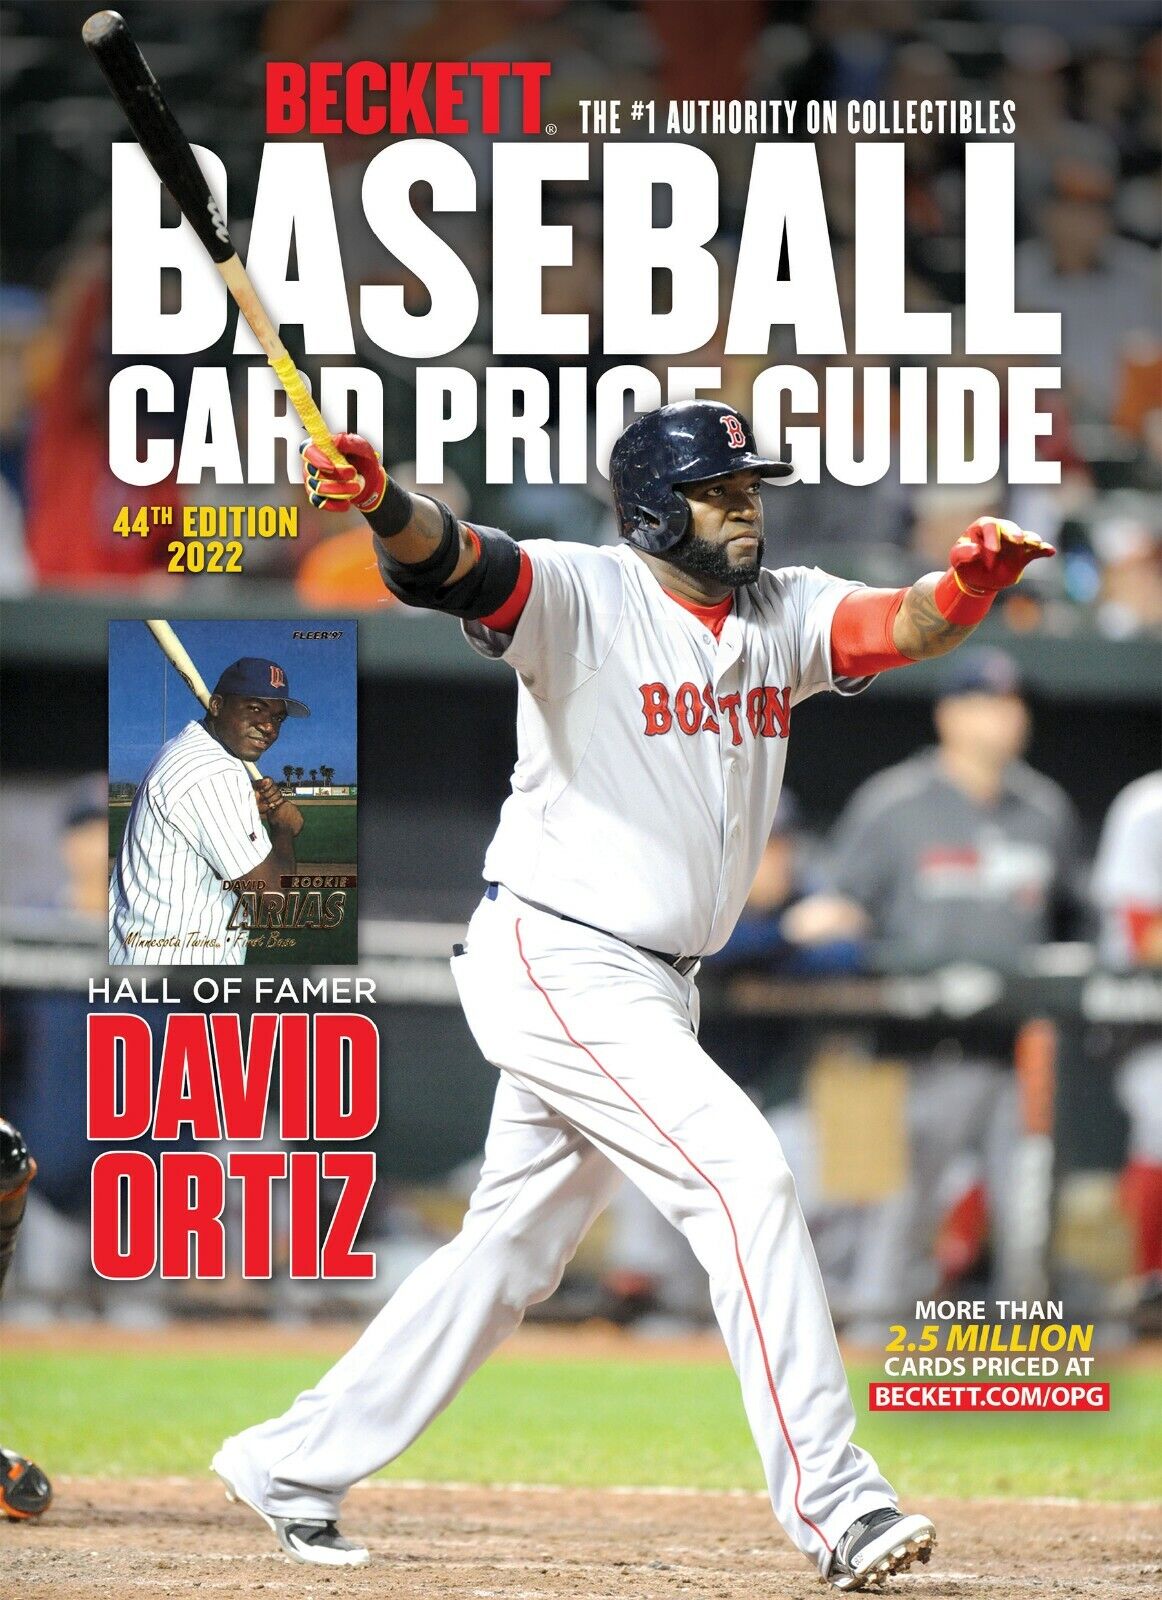 New 2022 Beckett BASEBALL CARD ANNUAL Price Guide 44th Edition with DAVID ORTIZ